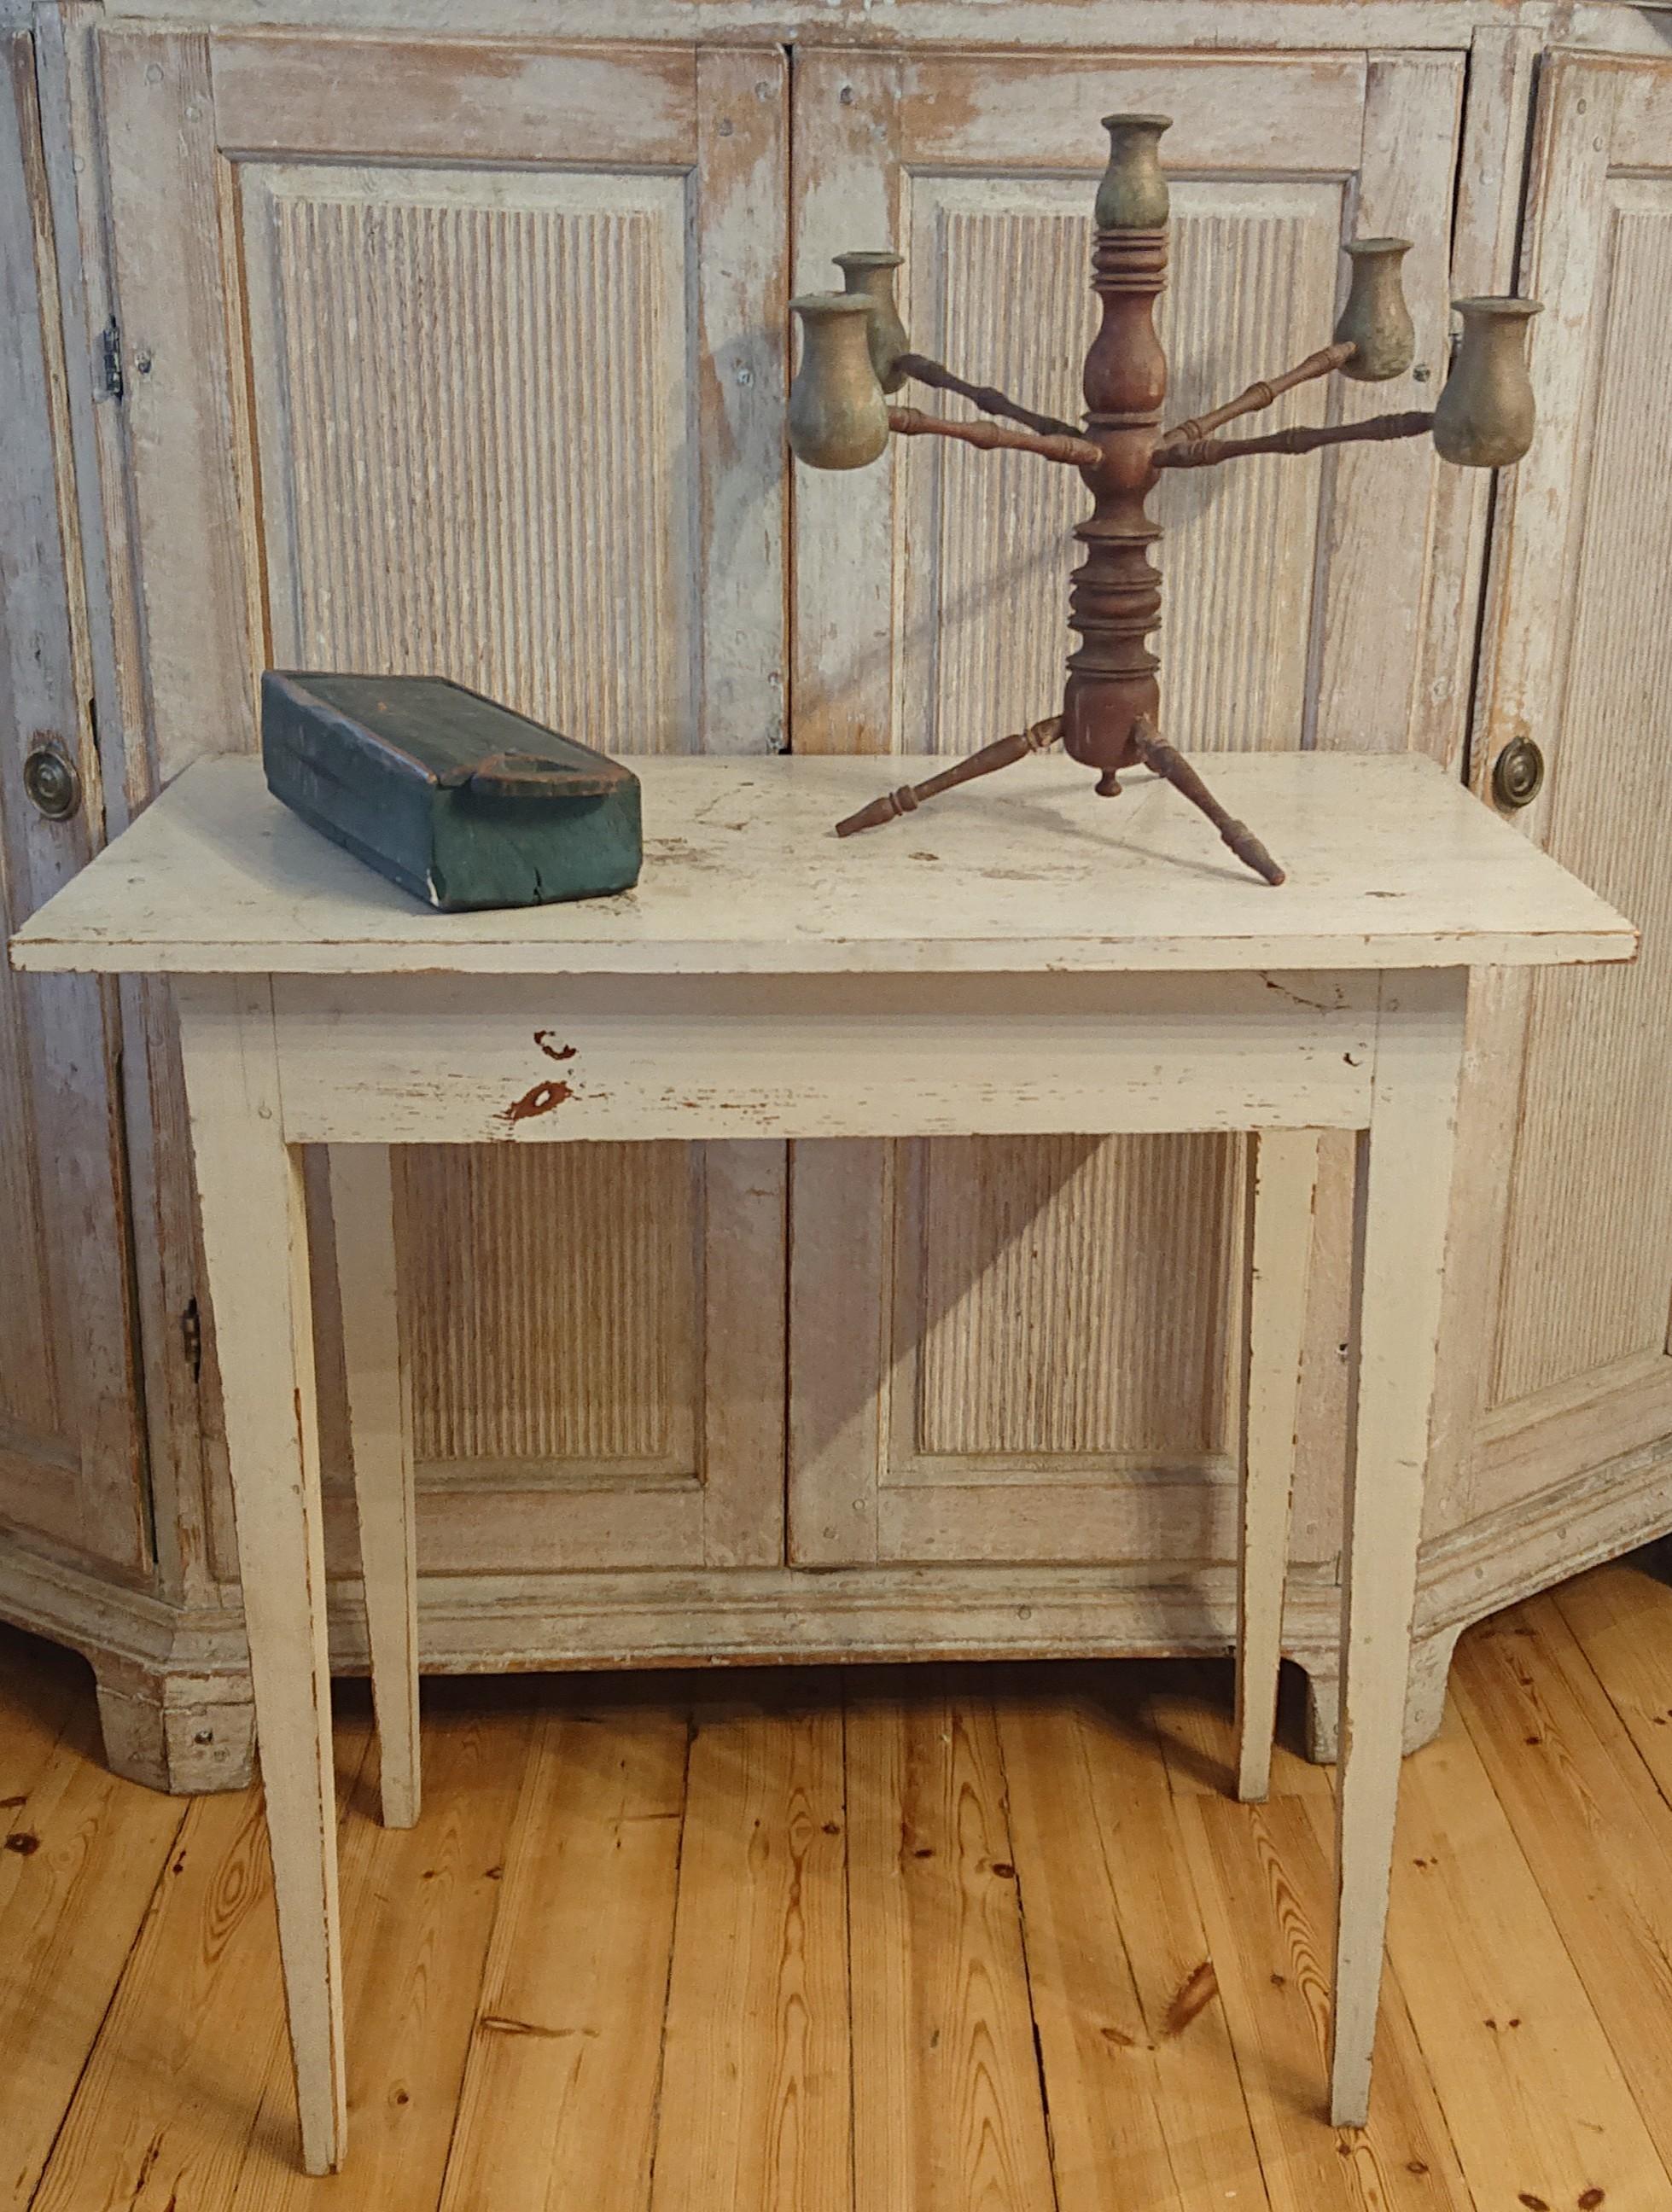 19th century Swedish Gustavian table from Piteå Norrbotten, Northern Sweden.
Small neat Gustavian table with untouched originalpaint.
The table has nice tapered legs.
Good antique condition with minor historic knocks, marks, scratchers, wear,